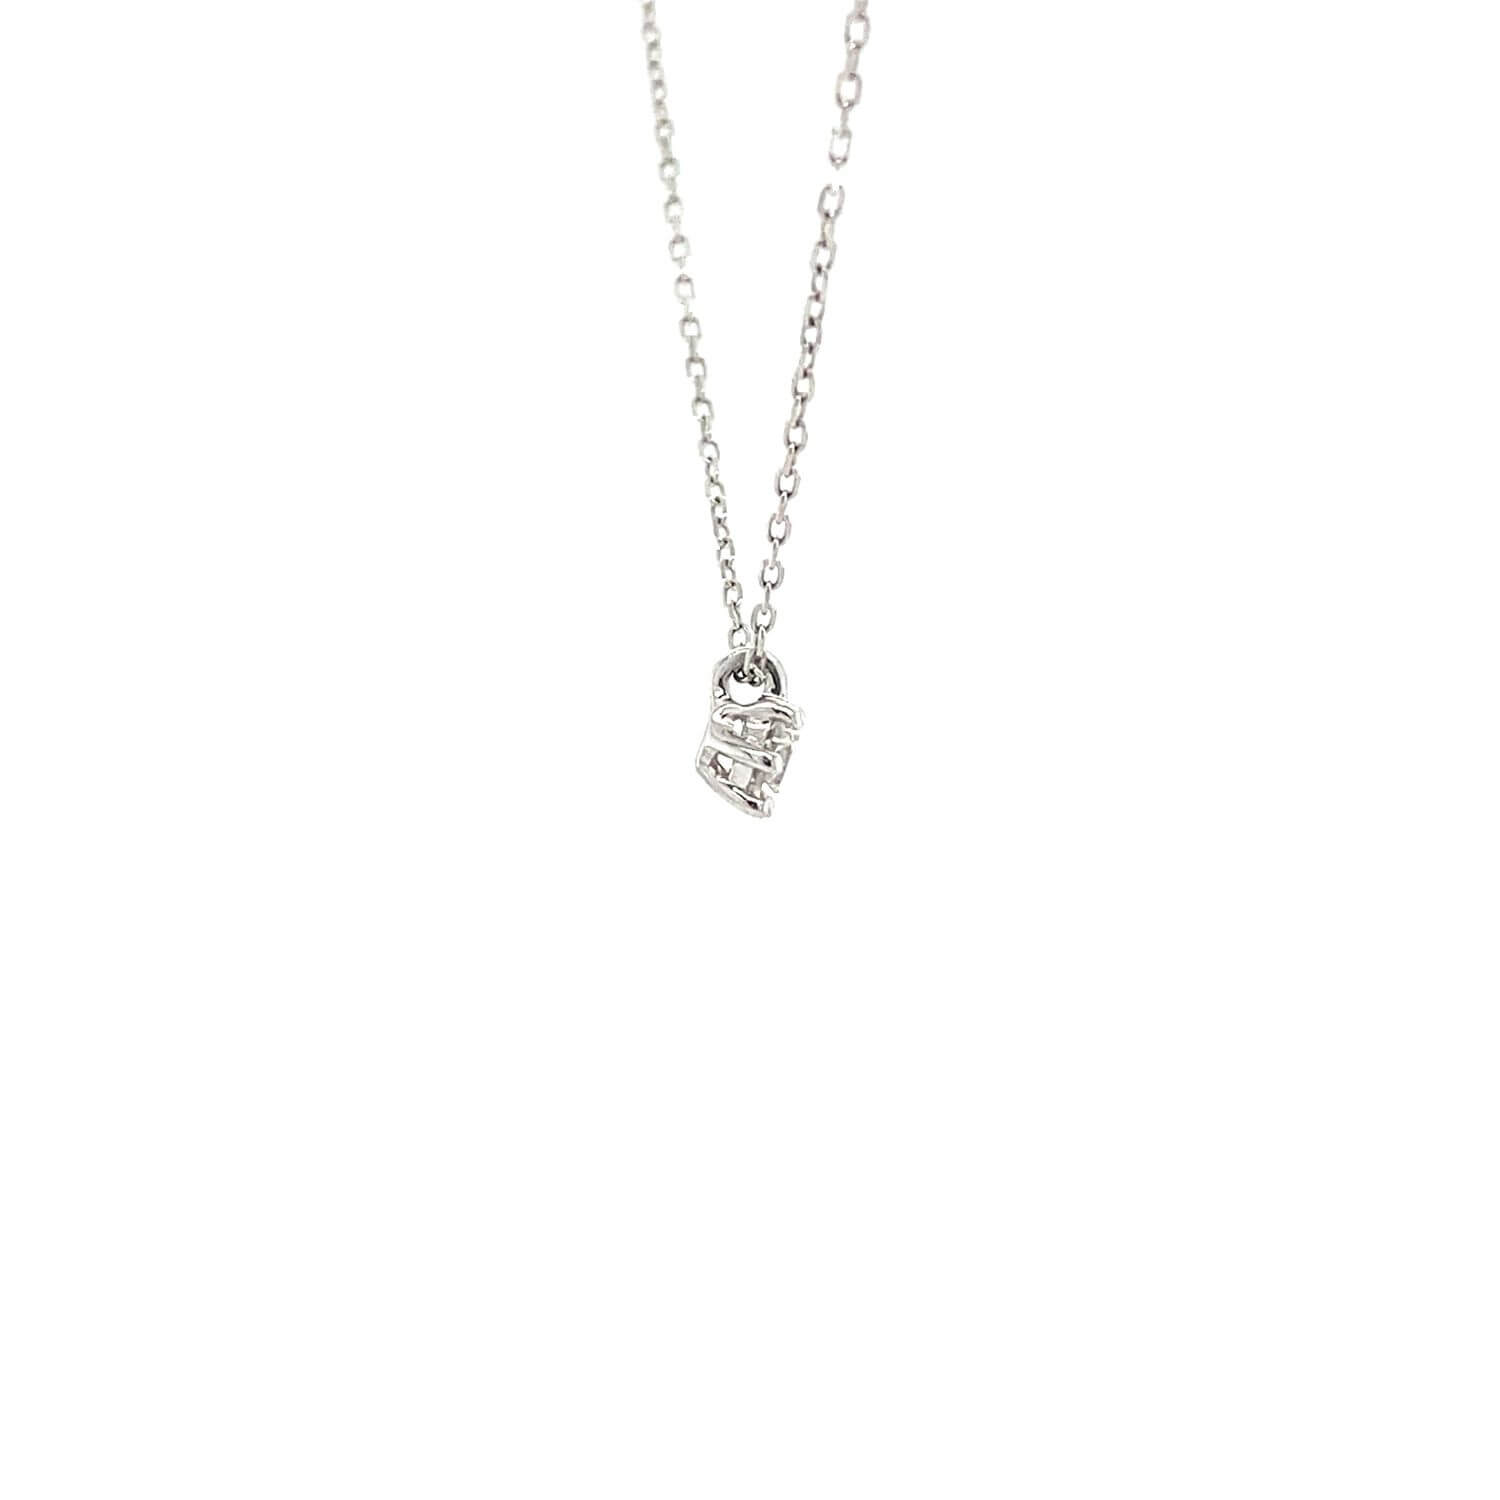 Sparkle Amsterdam wit gouden ketting Shining light 0,10 ct